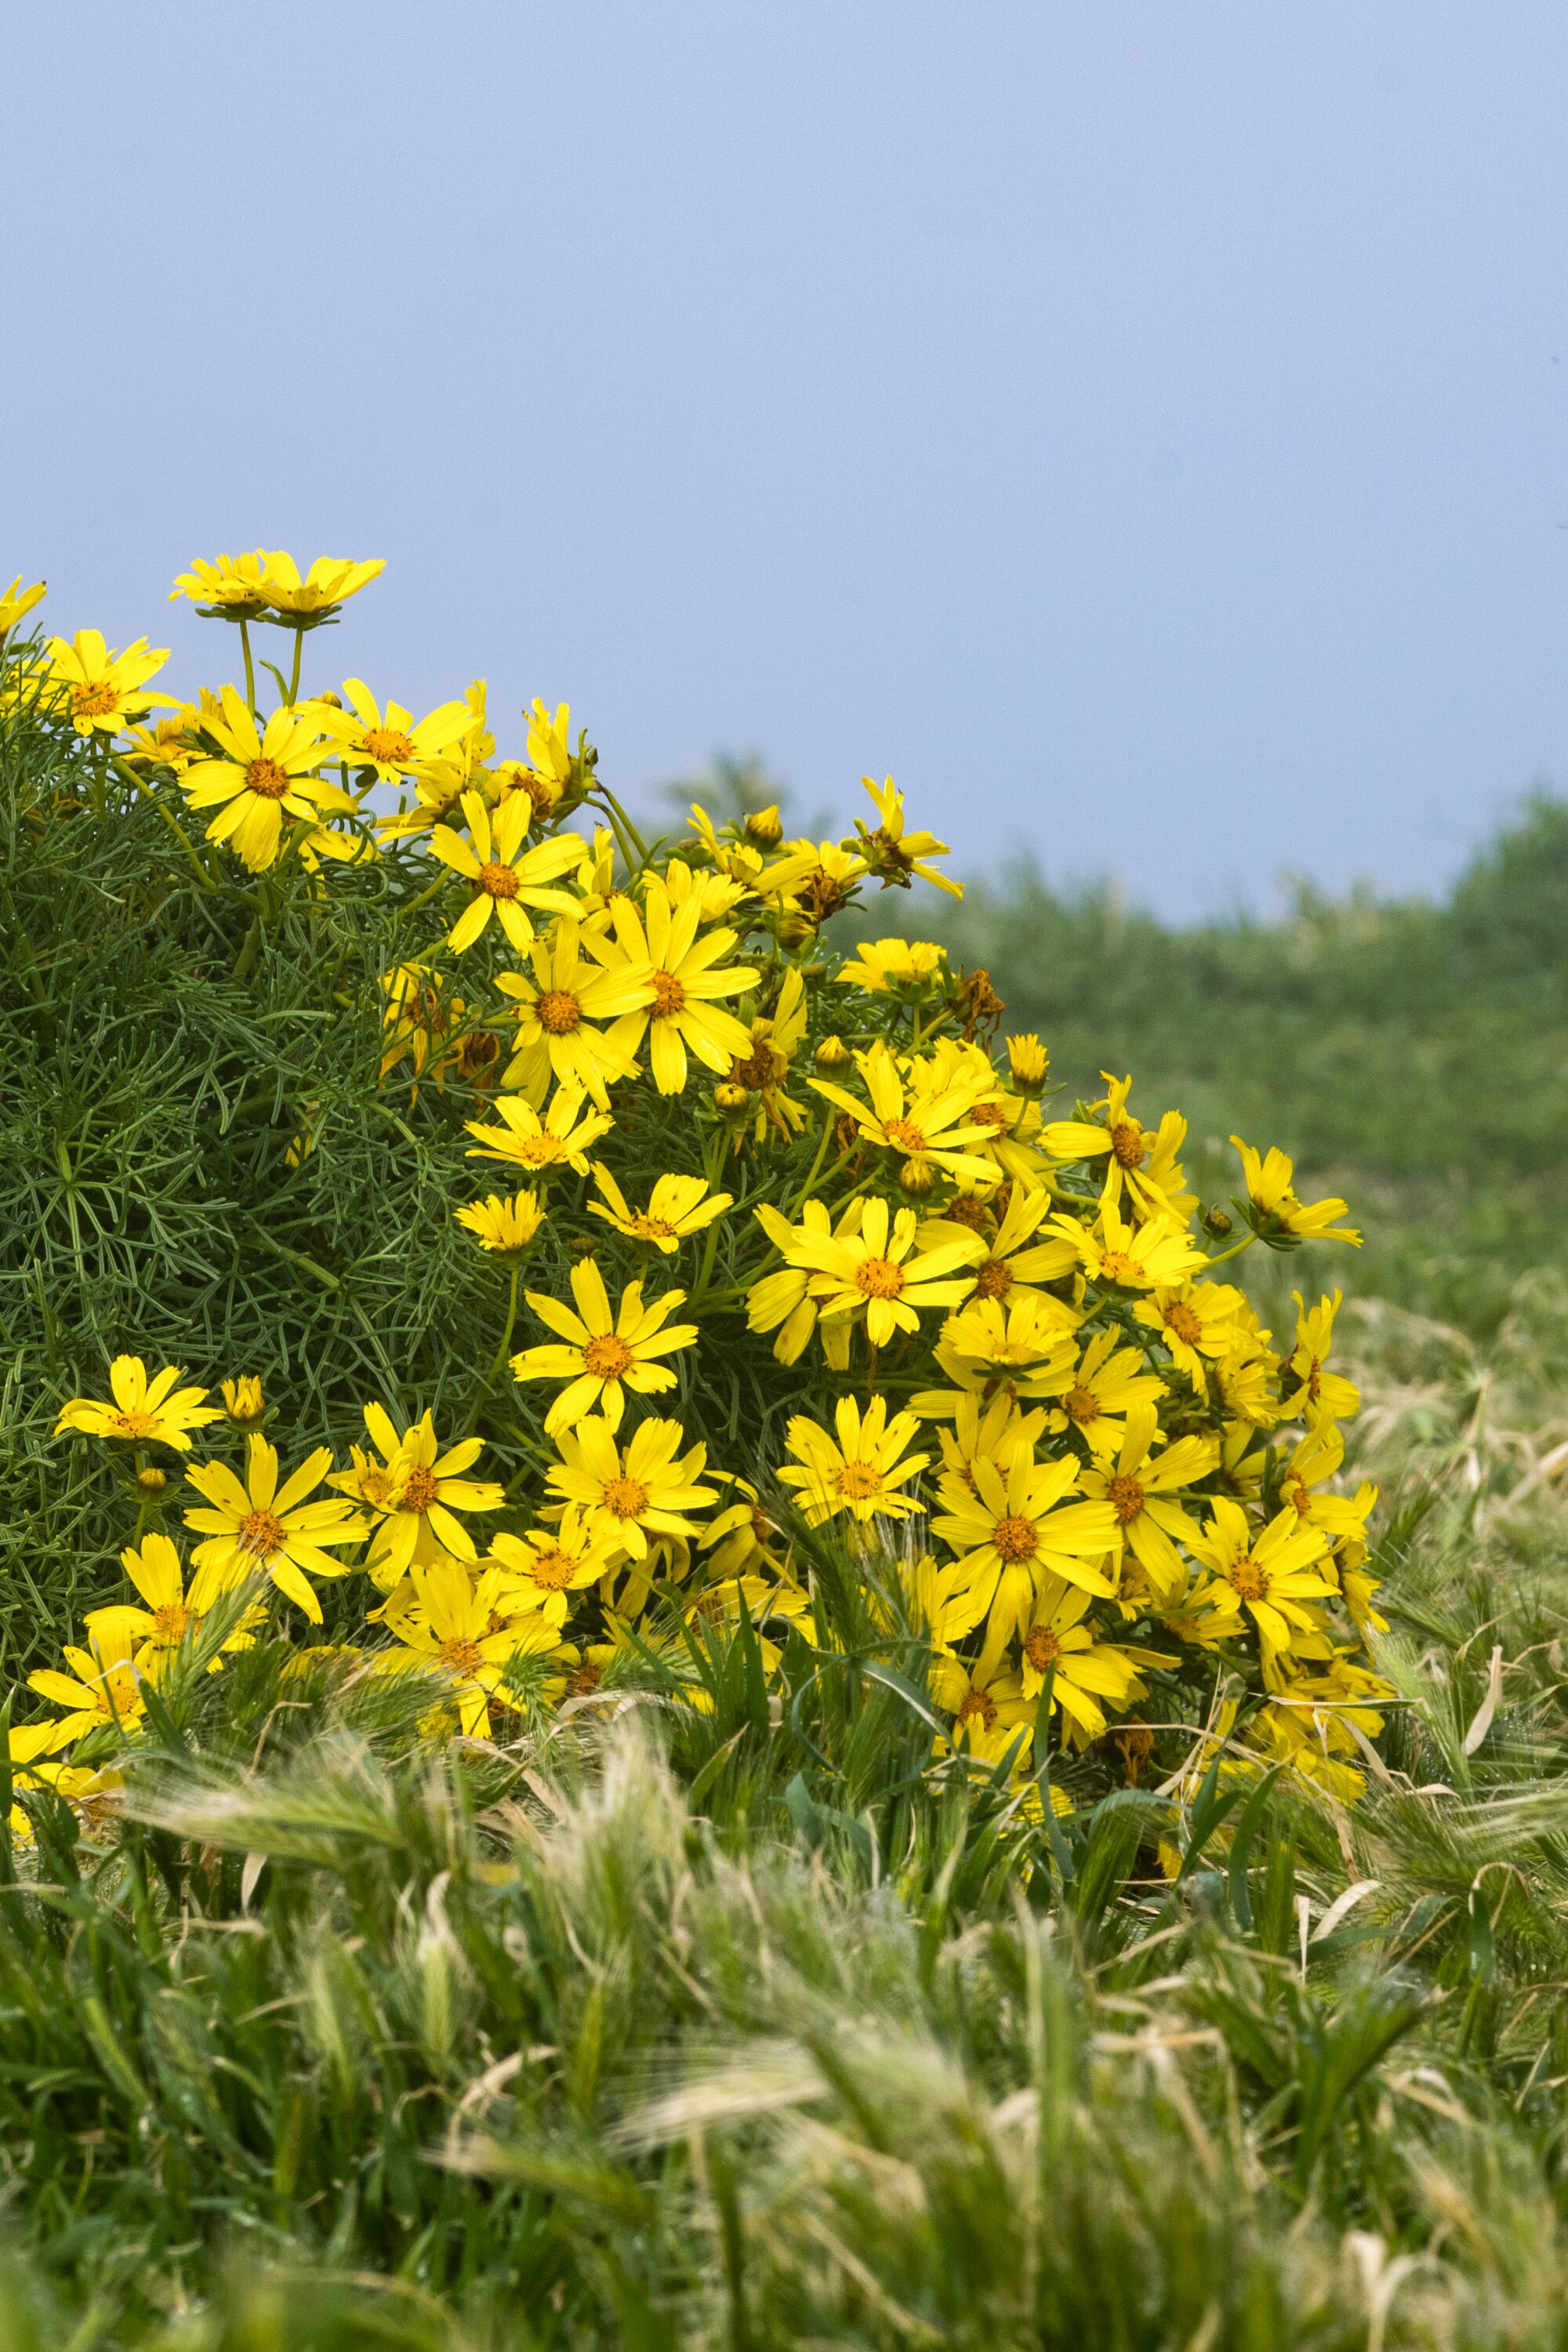 The tree sunflower, or coreopsis.